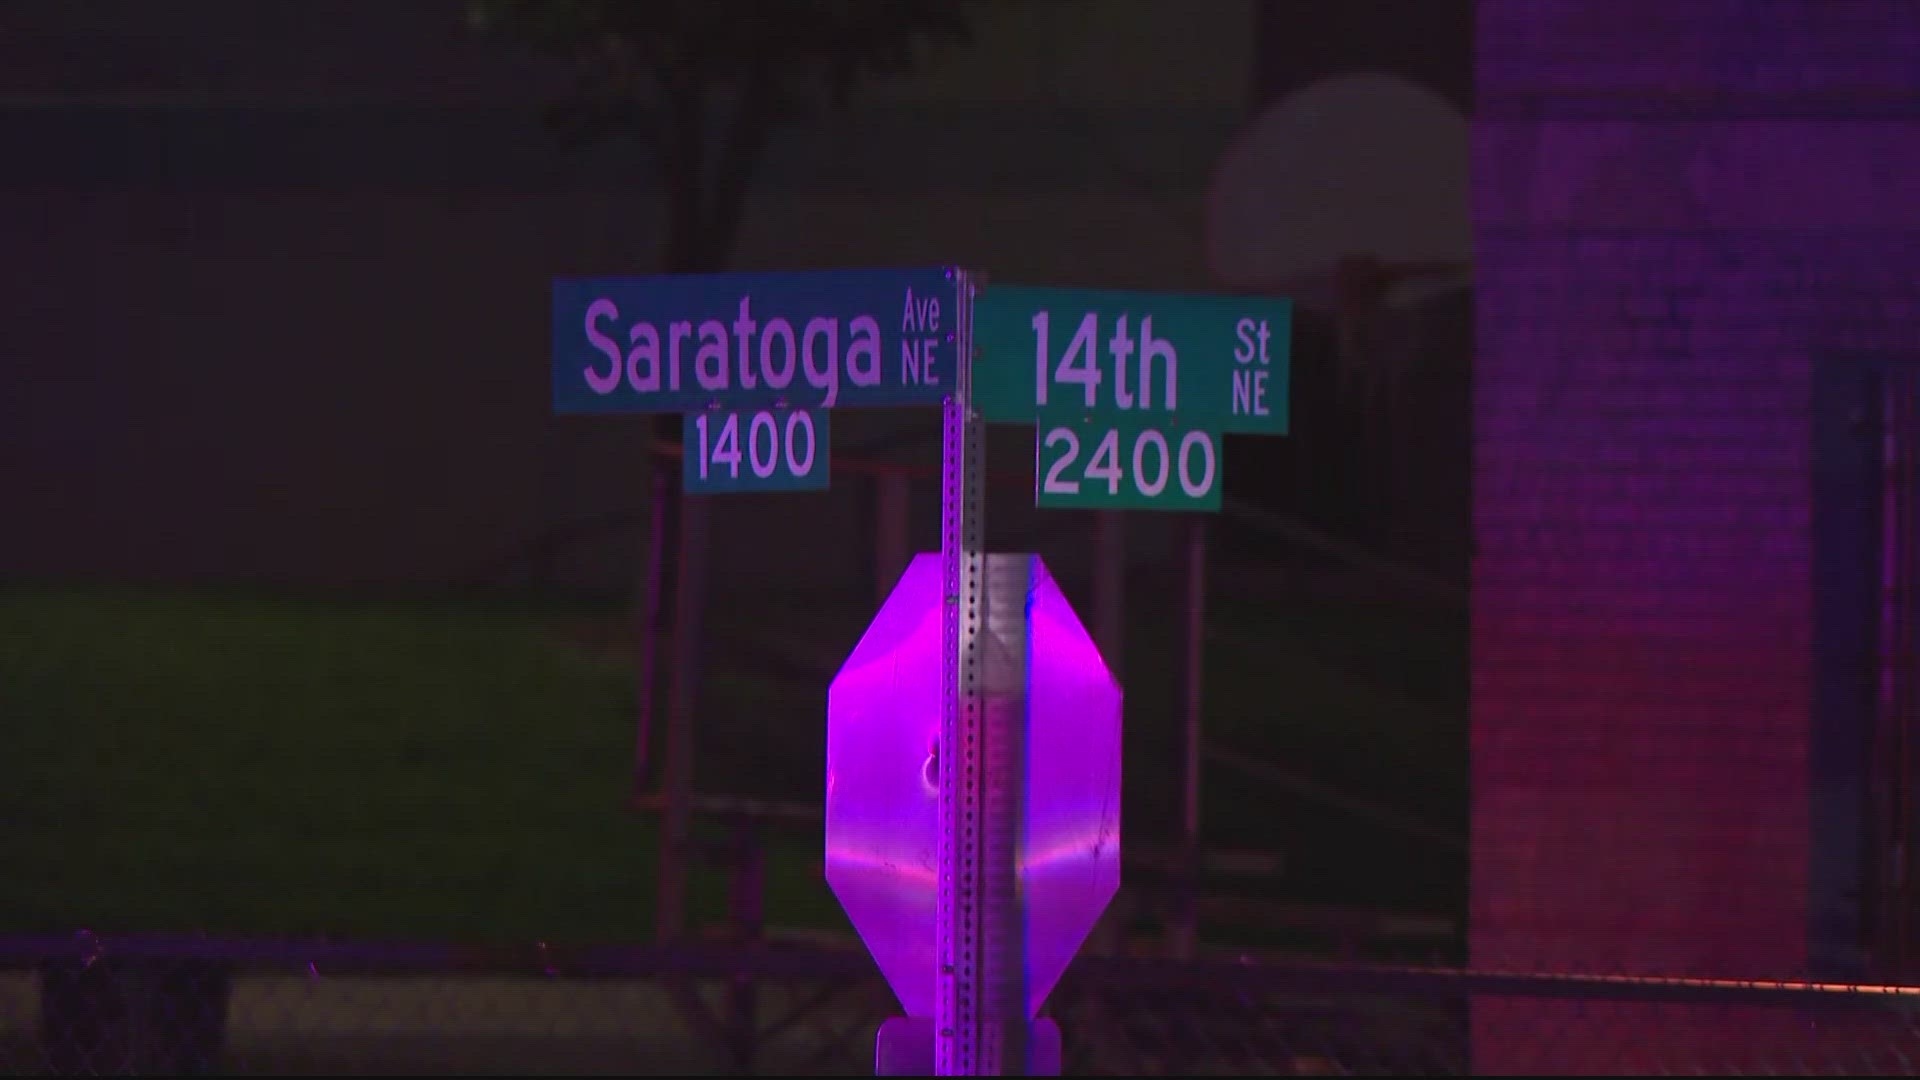 The shooting happened near 14th Street and Saratoga Avenue just before 10 p.m.